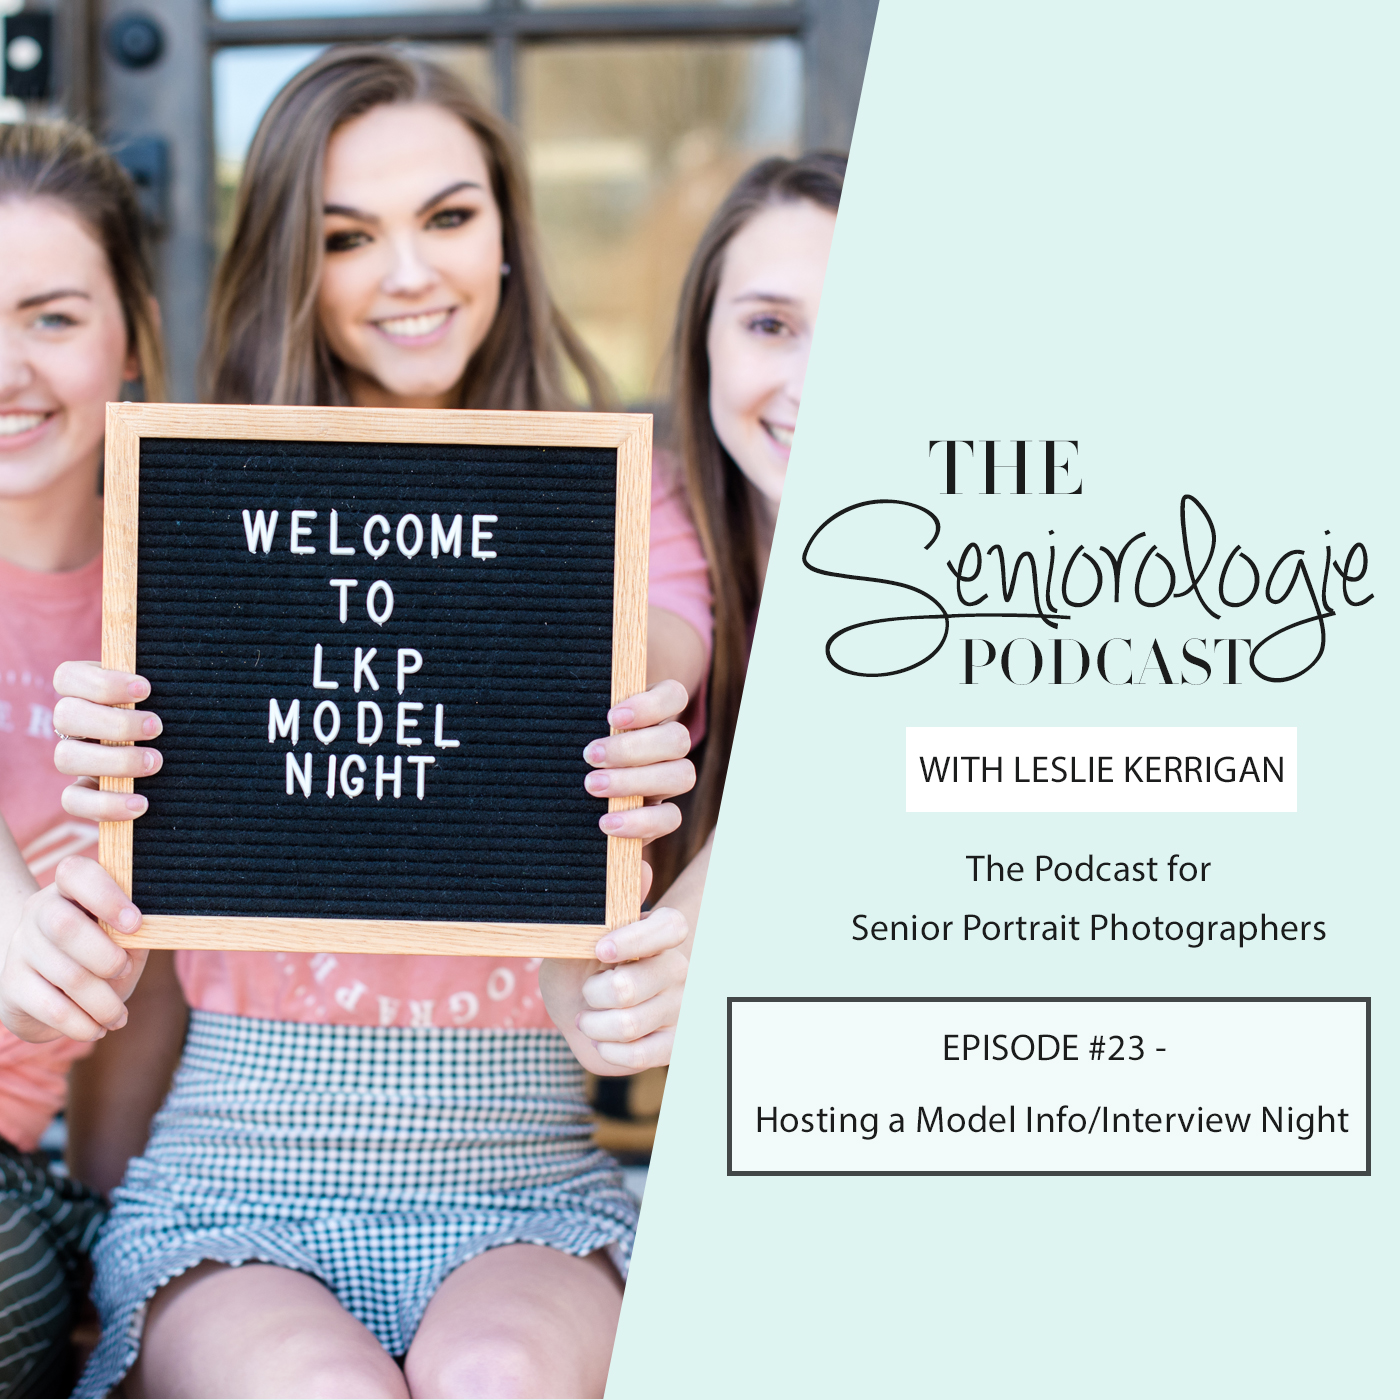 How To Host A Model Night Event: Tips for Senior Portrait Photographers to market their senior spokesmodel teams, shared on the Seniorologie Podcast